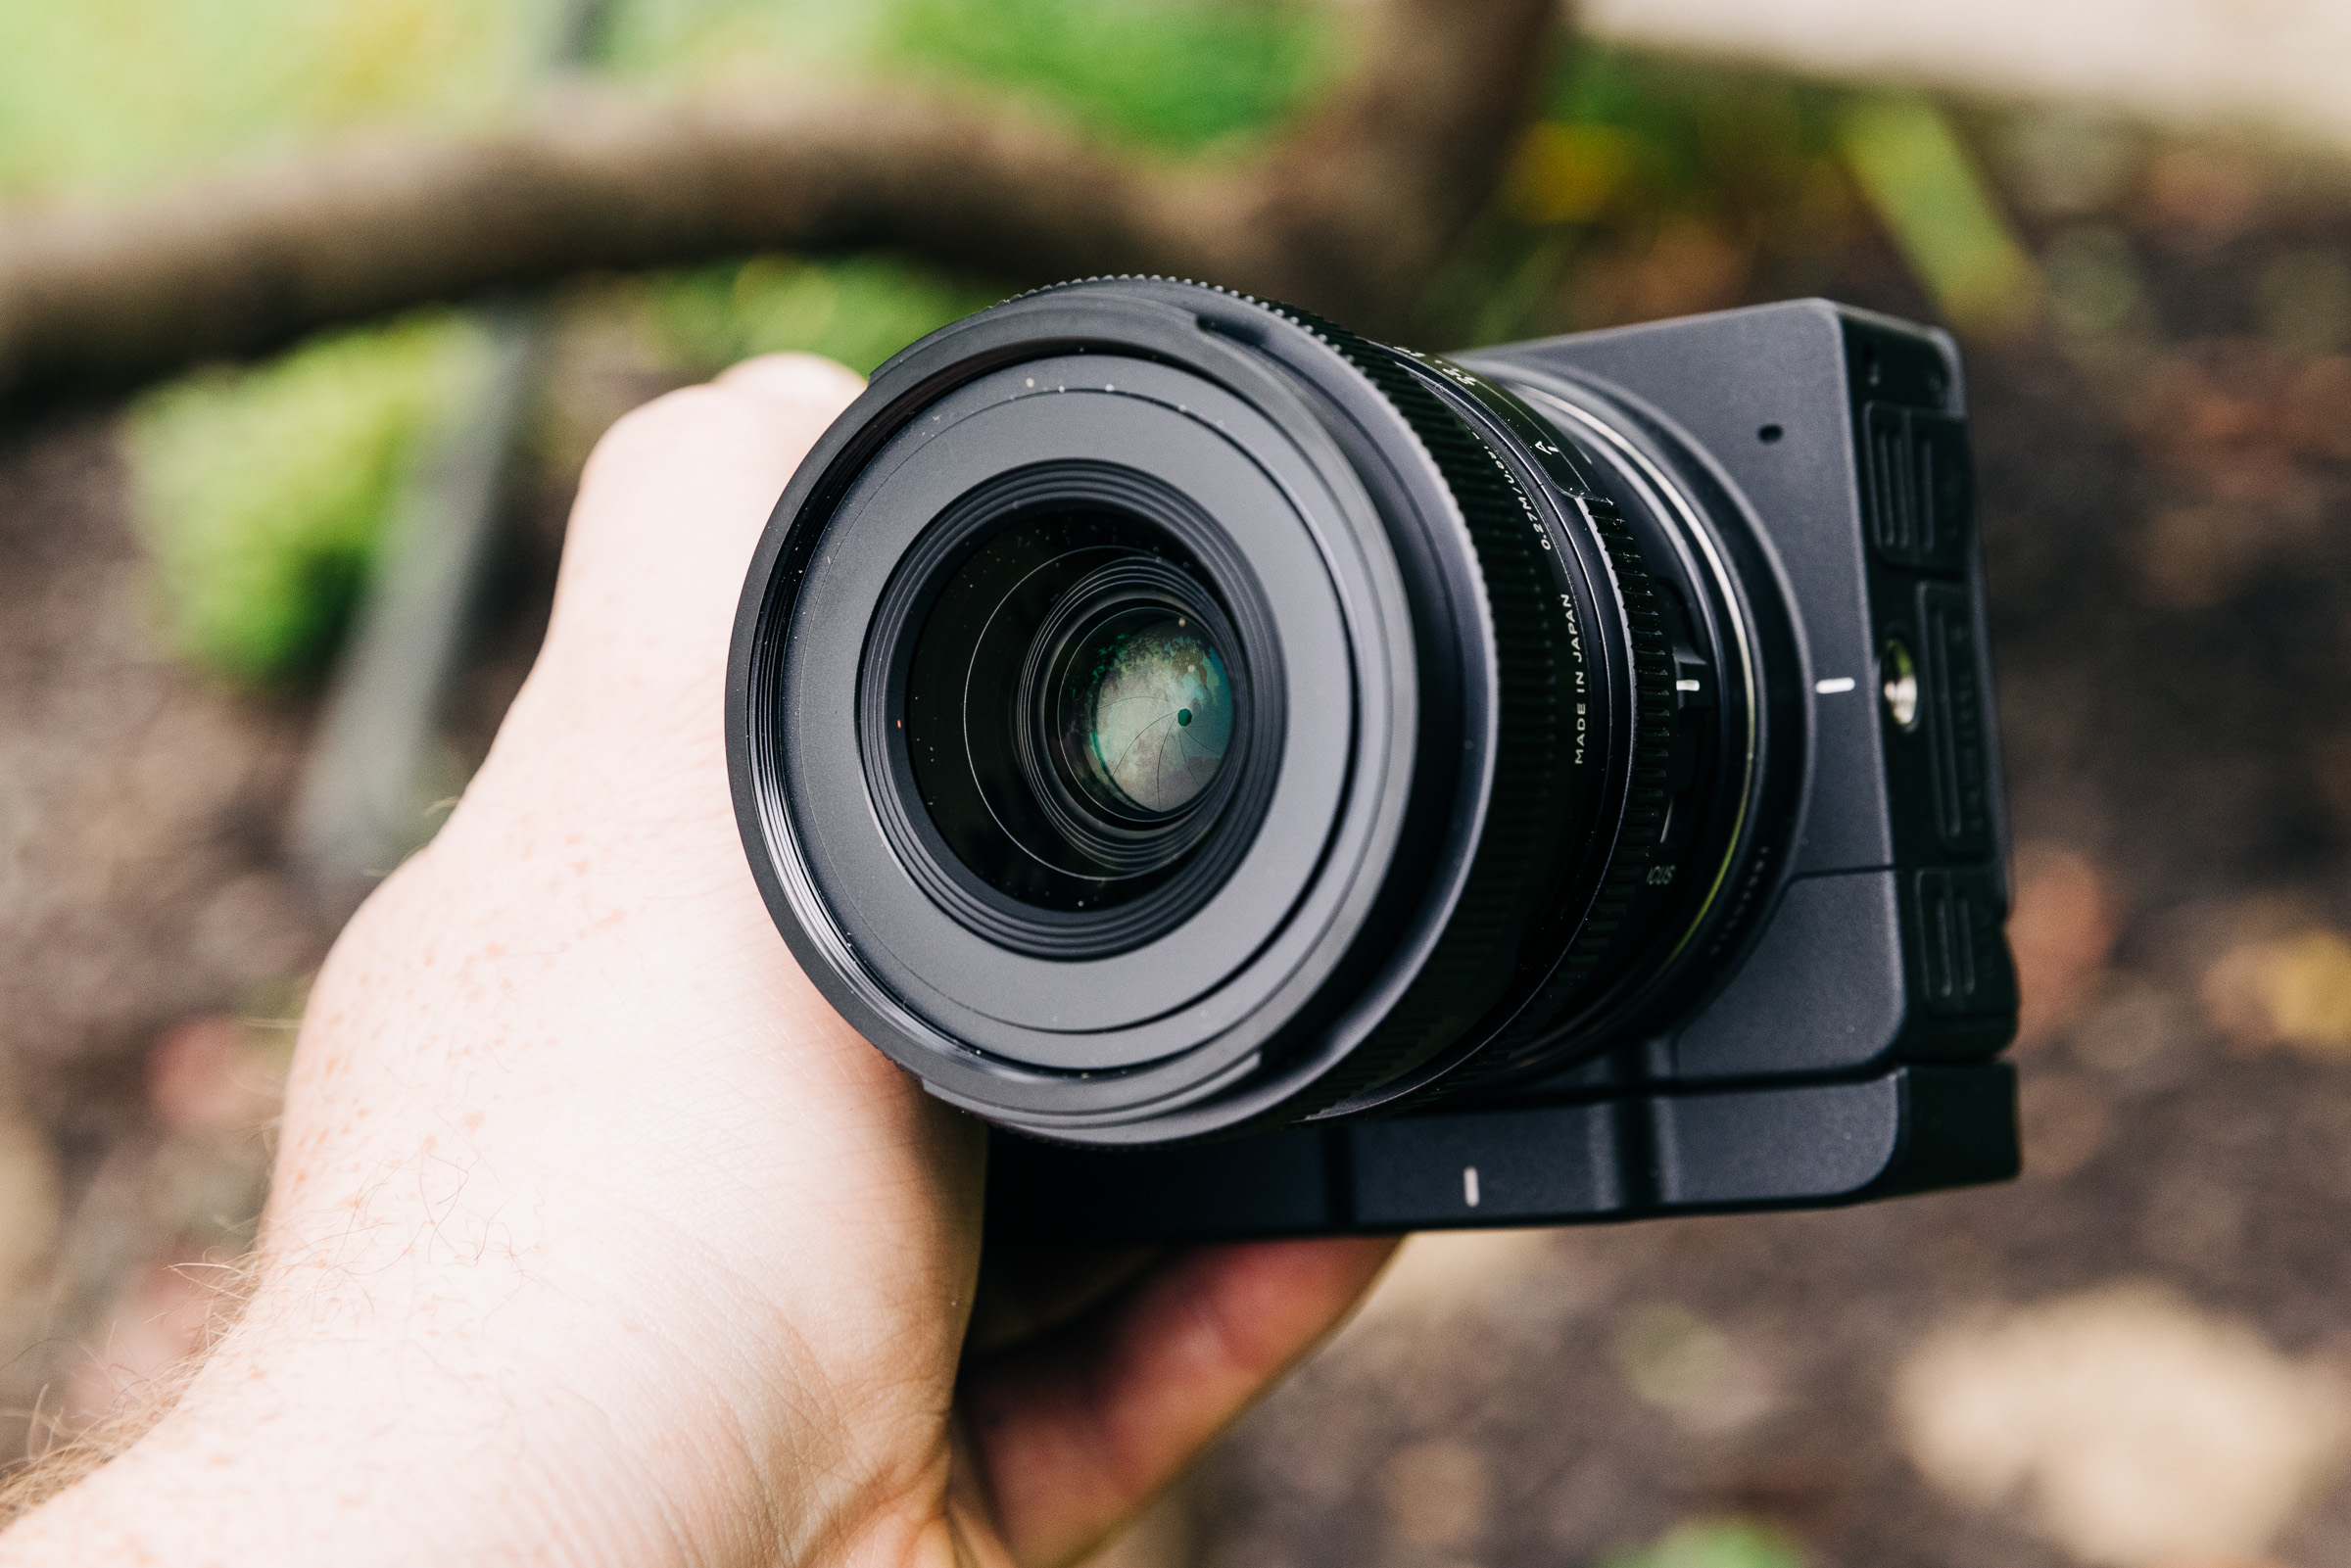 Sigma 35mm f/2 DG DN prime lens review: A solid performer